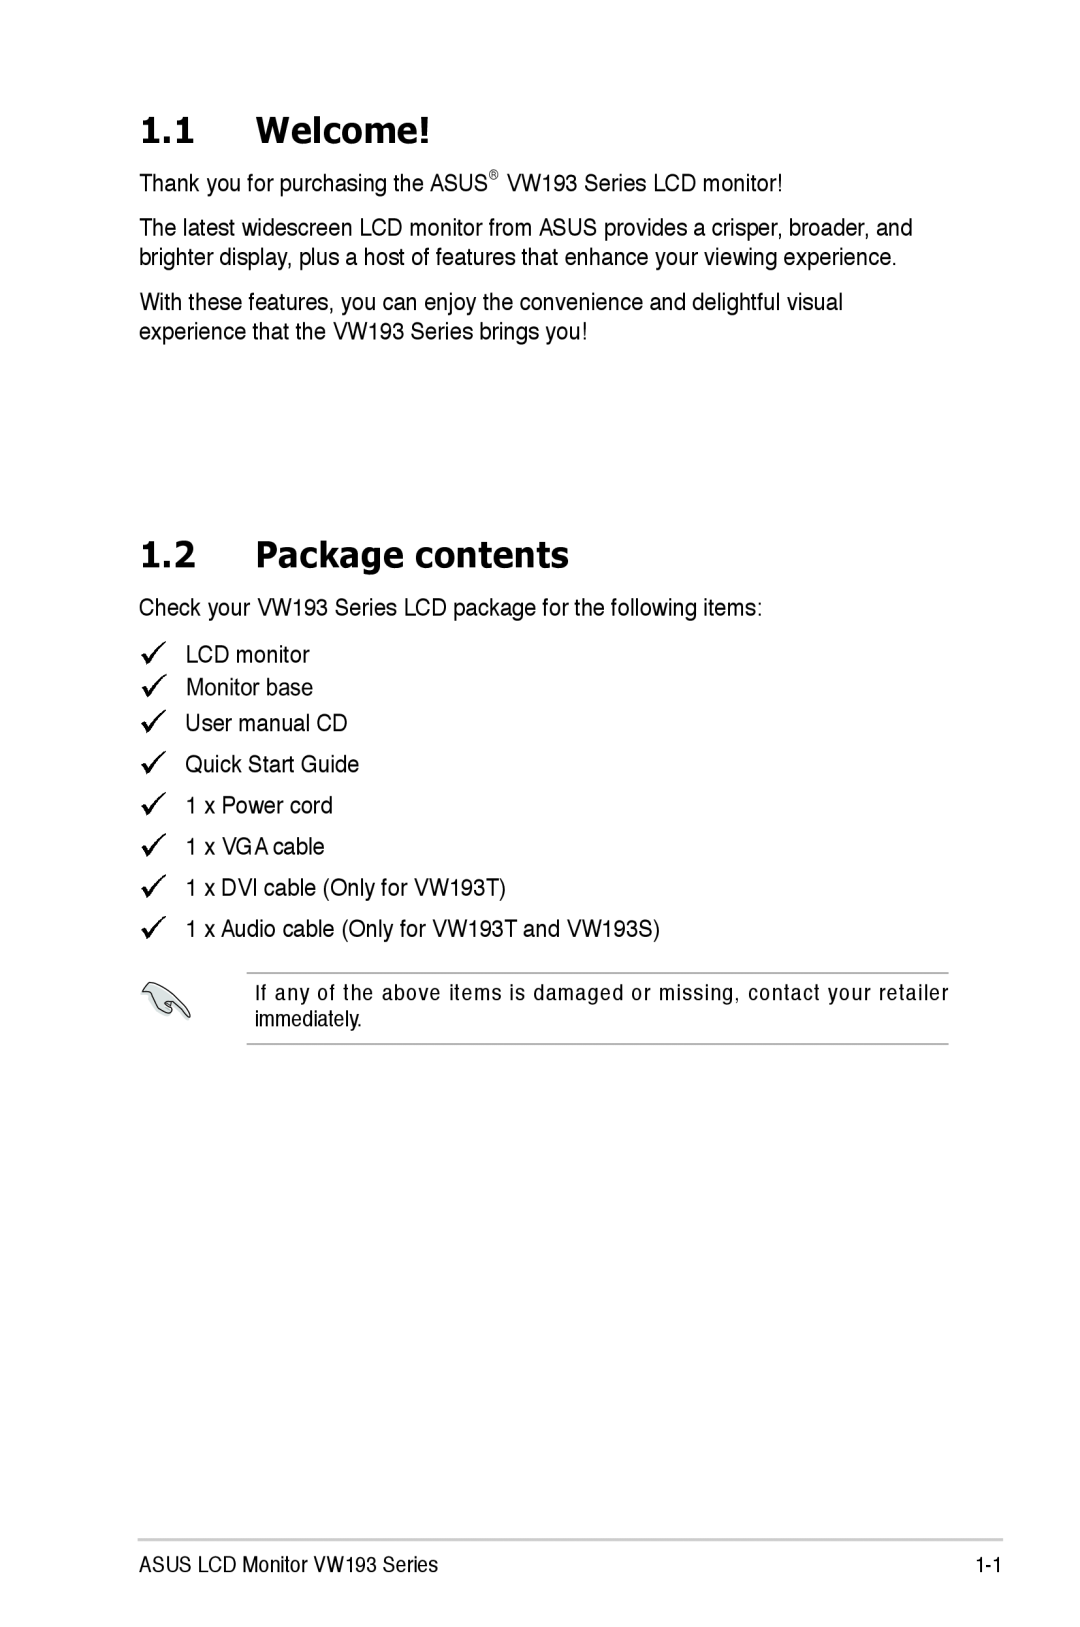 Asus VW193 manual Welcome, Package contents 